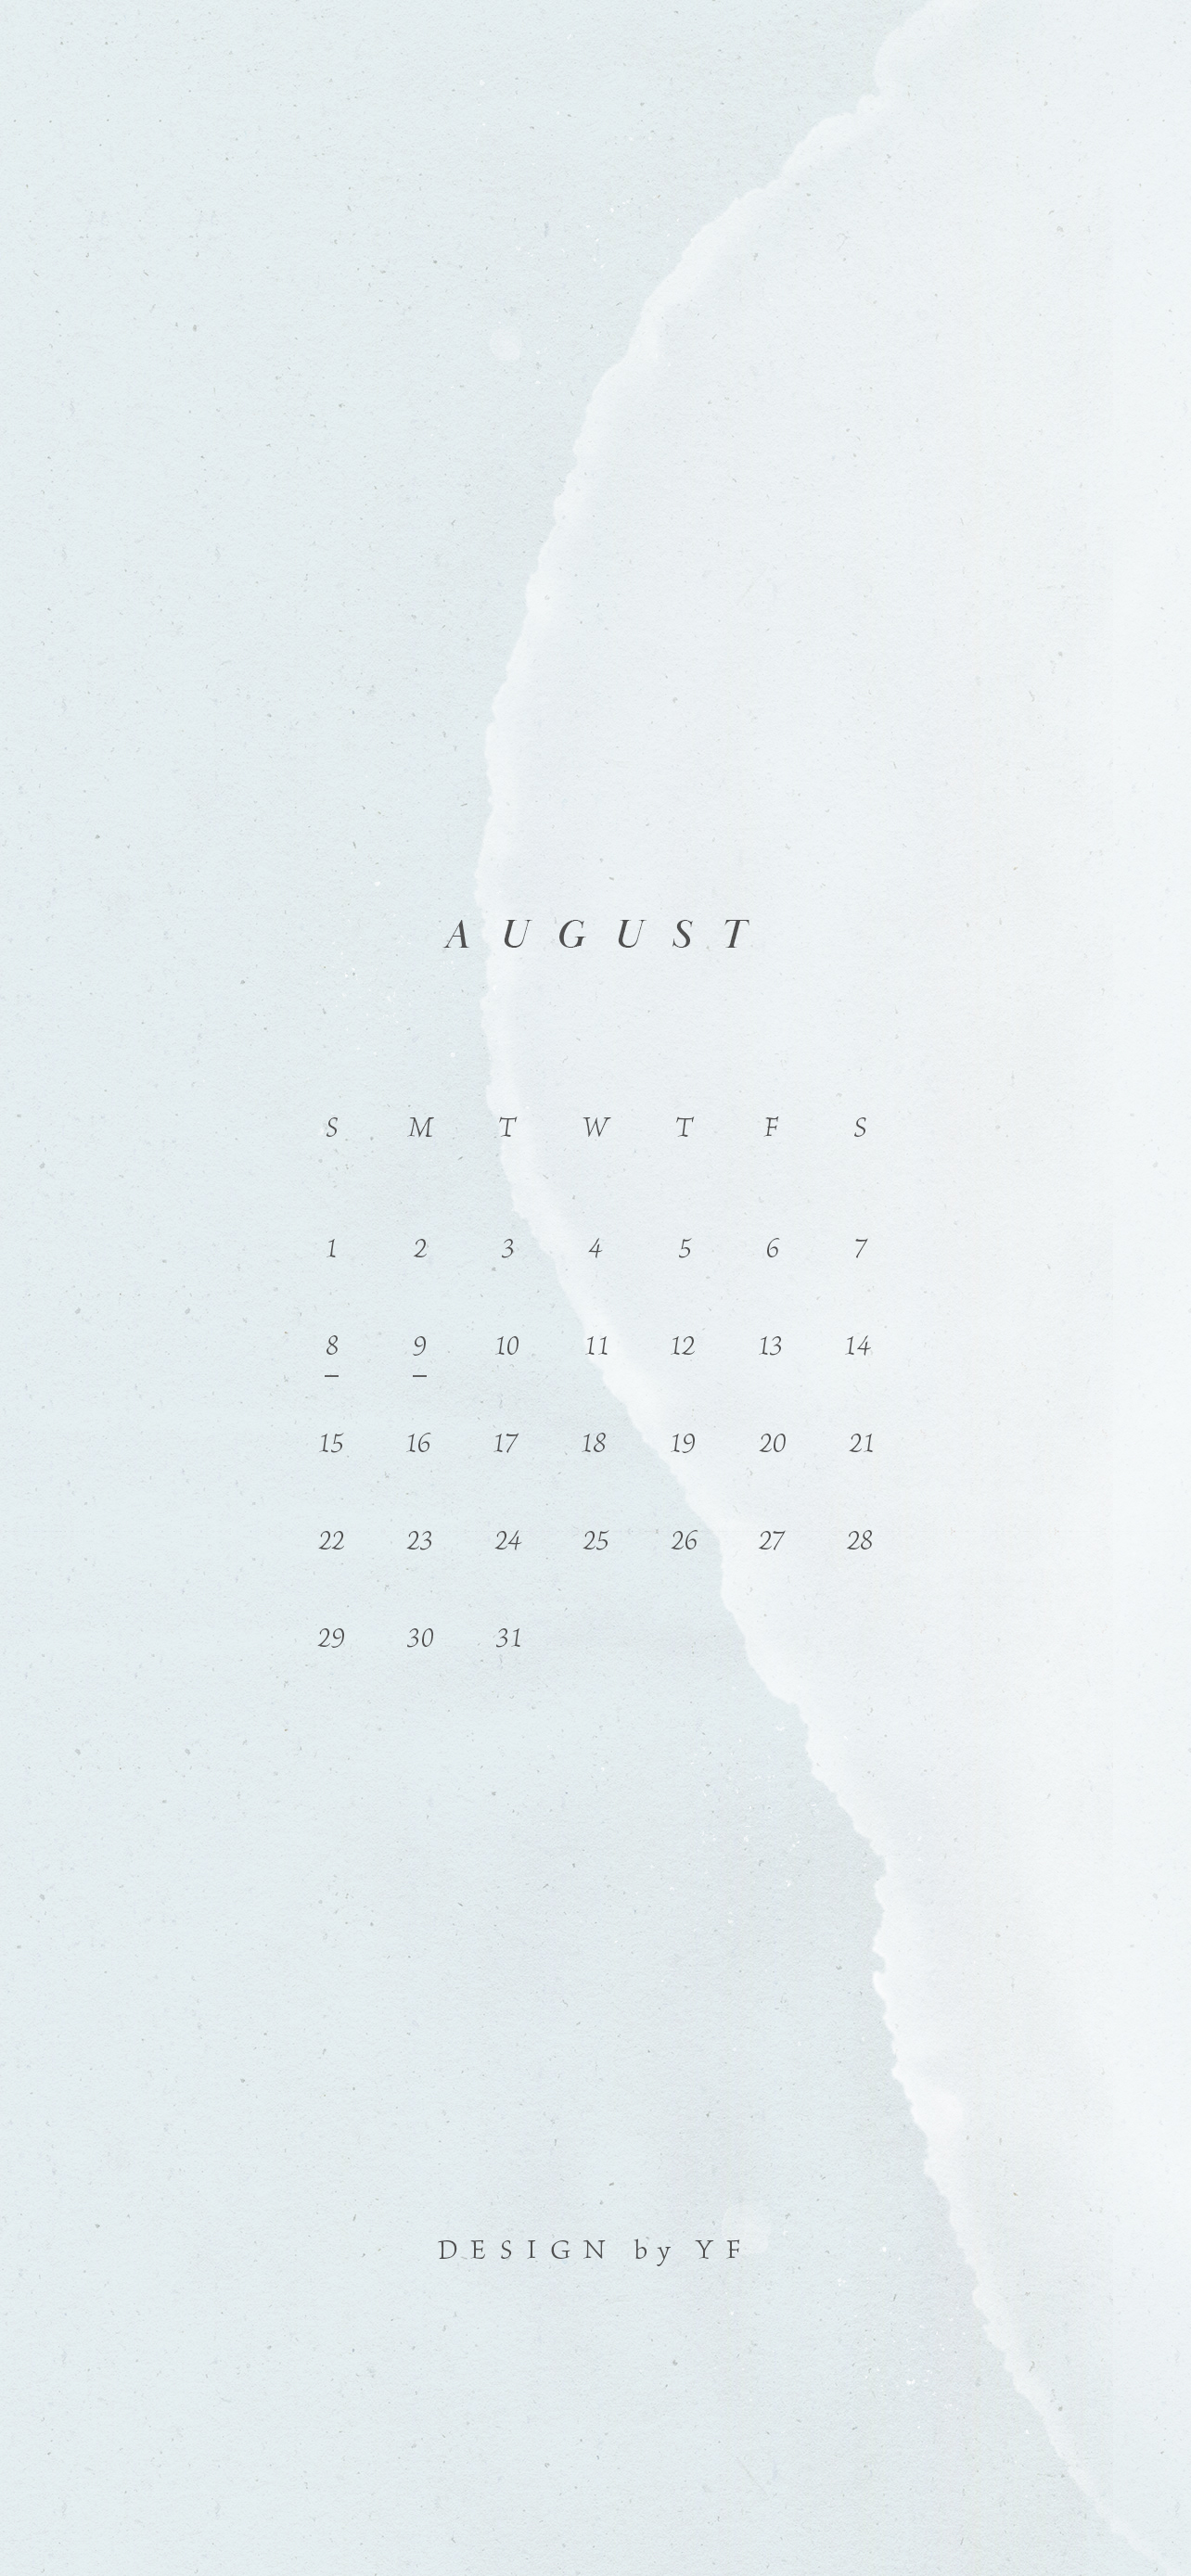 August 21 Calendar Wallpaper For The Iphone Design By Yf